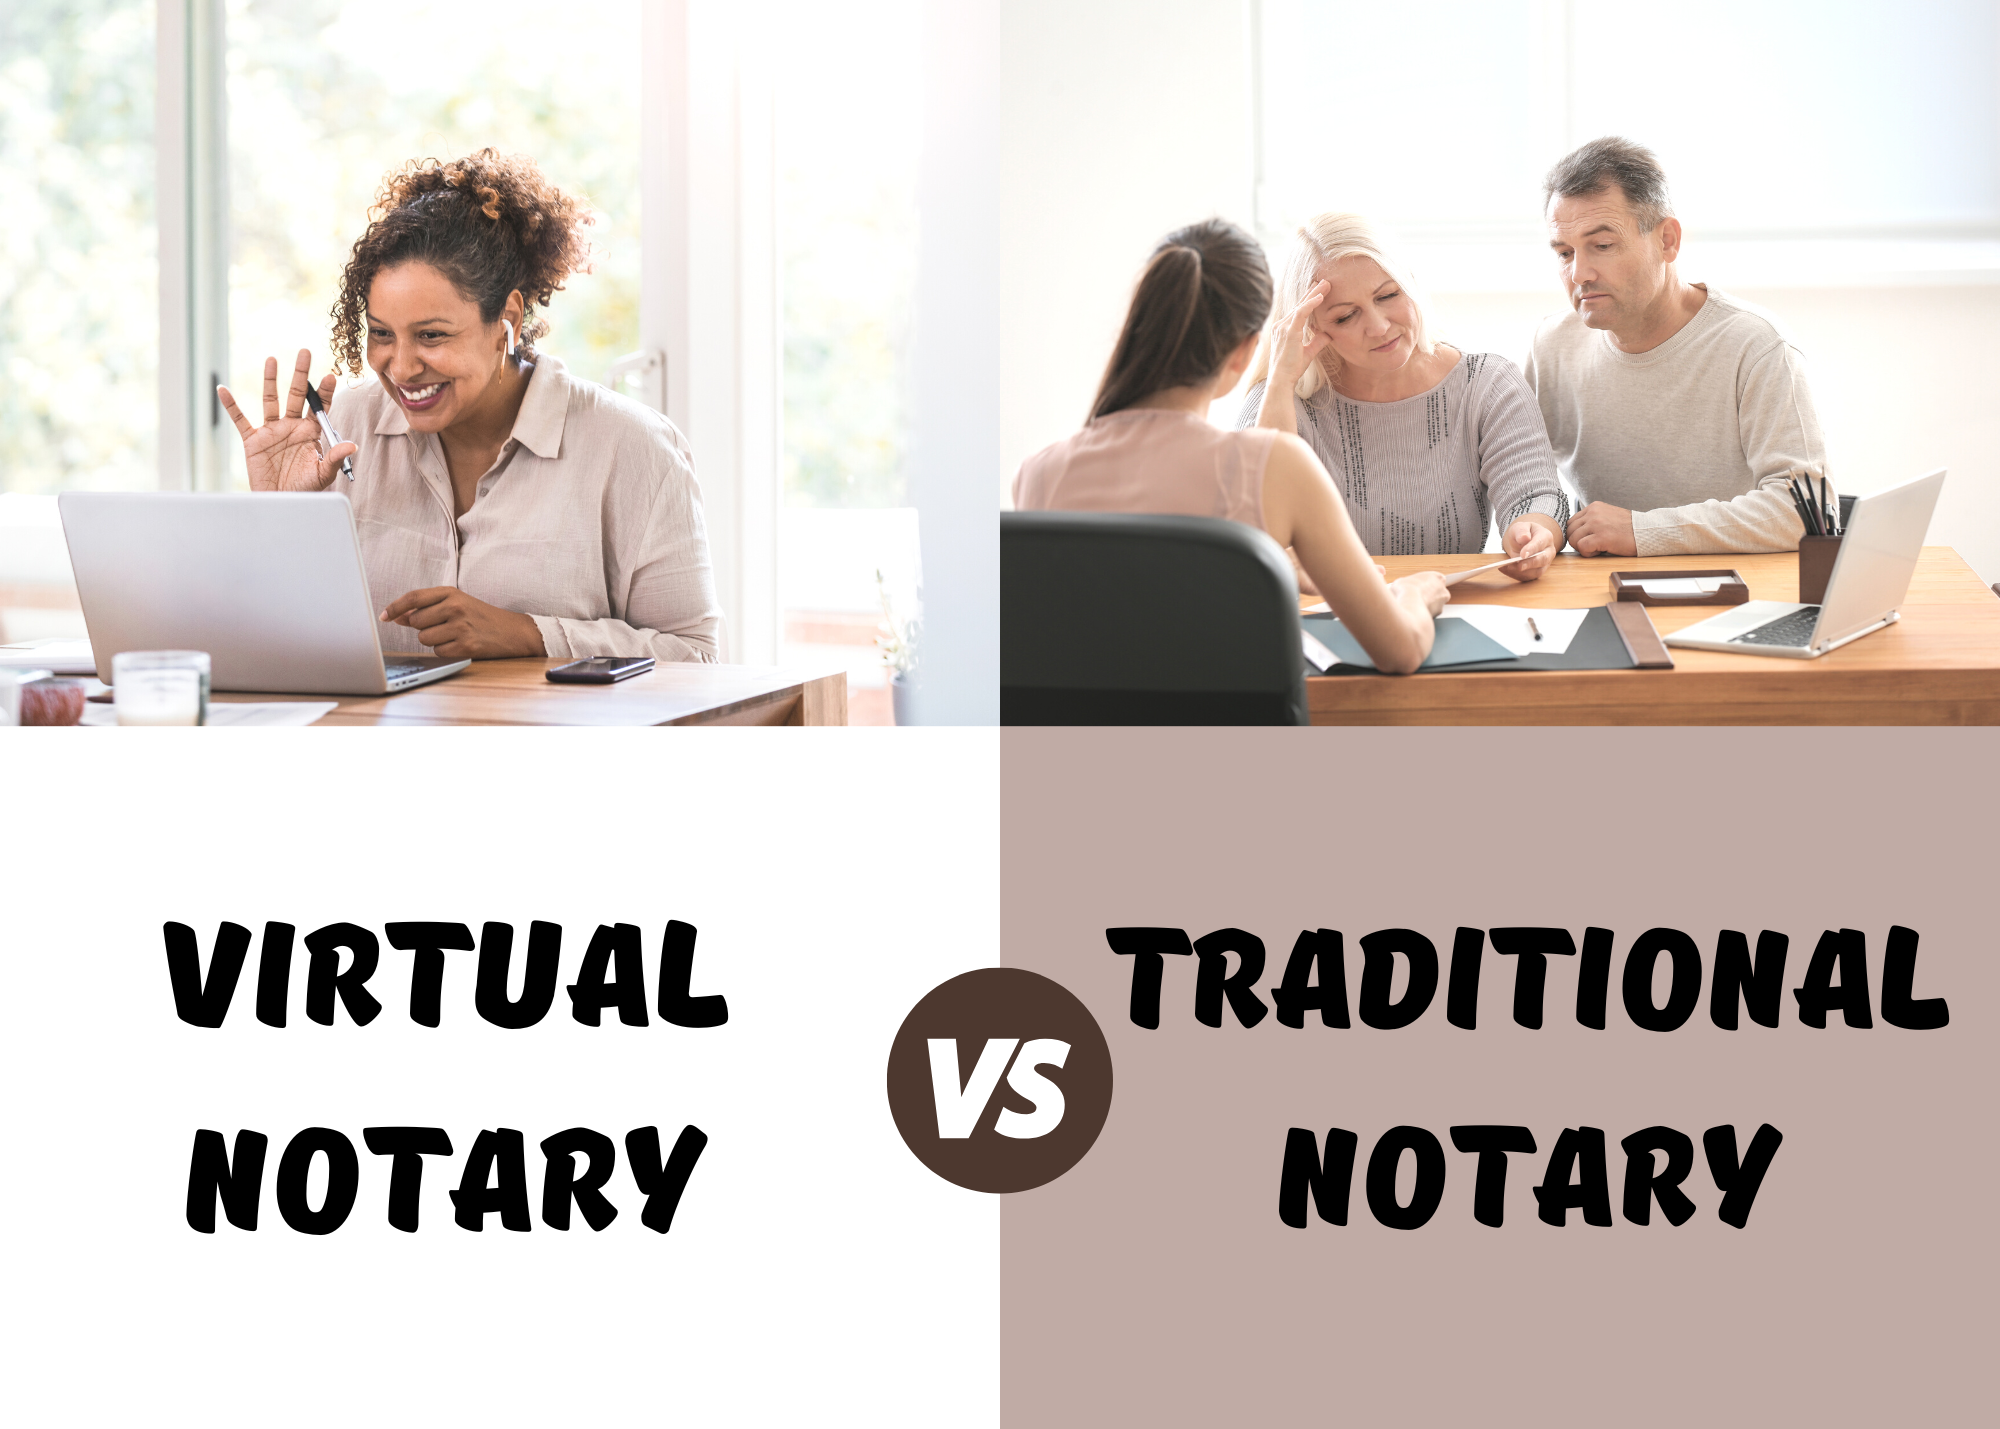 Remote Online Notary vs. Traditional Notary Services in Texas: Which One is Right for You?